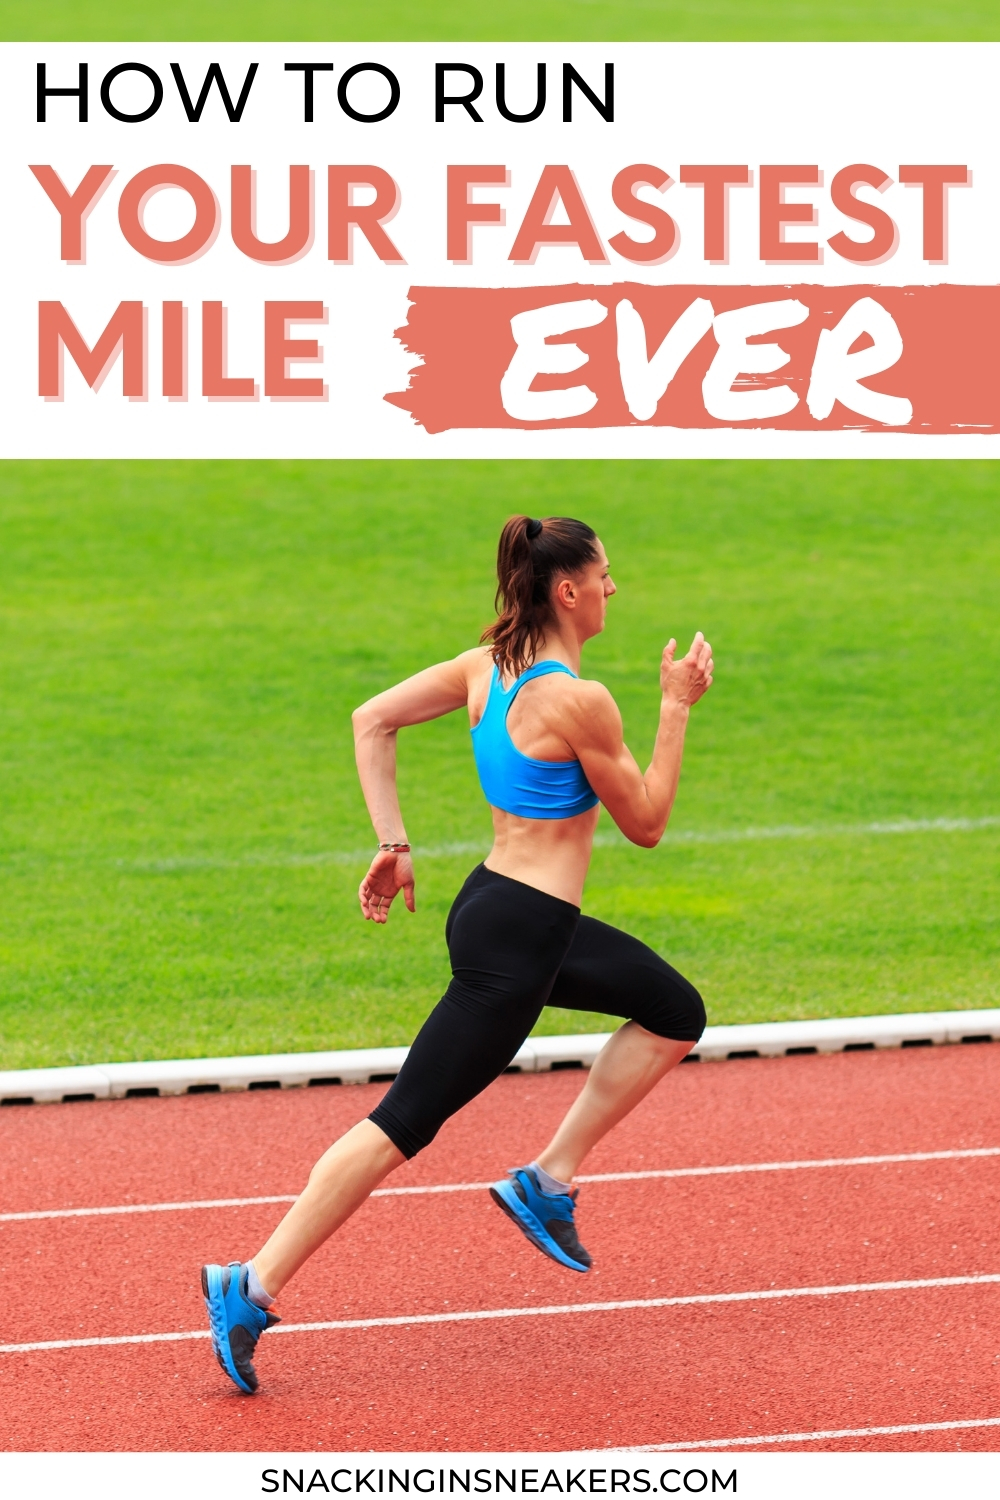 How to Run 6 Miles Faster